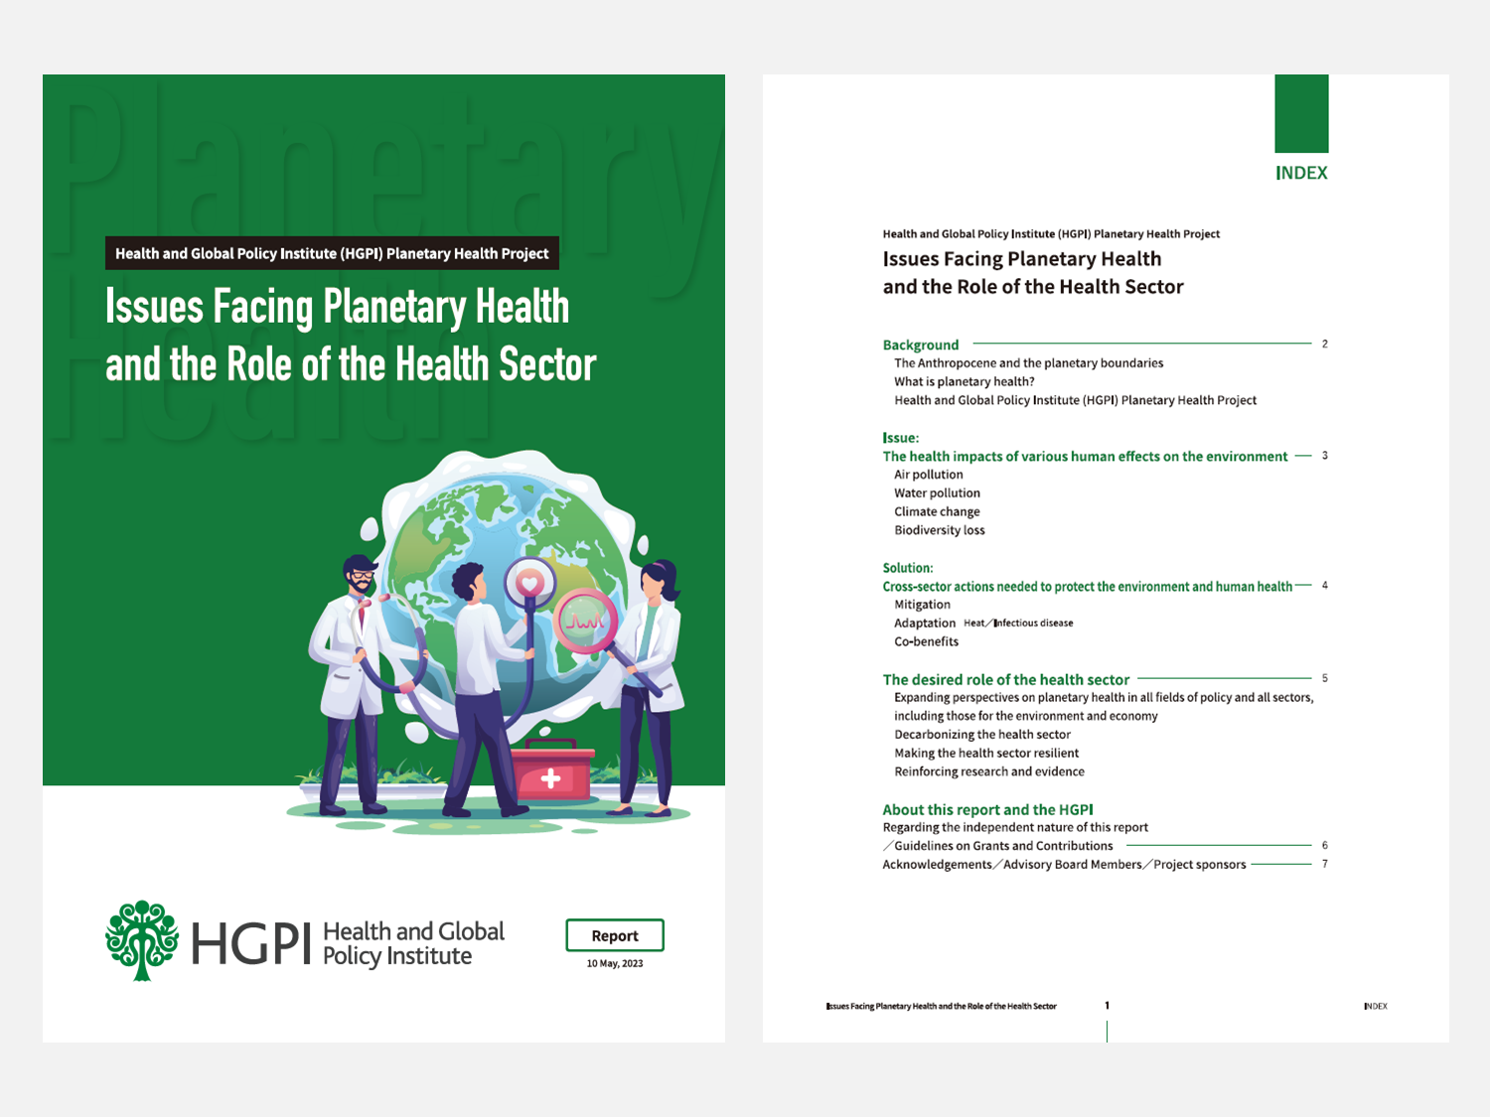 [Publication Report] Planetary Health Promotion Project “Issues Facing Planetary Health and the Role of the Health Sector” (May 10, 2023)